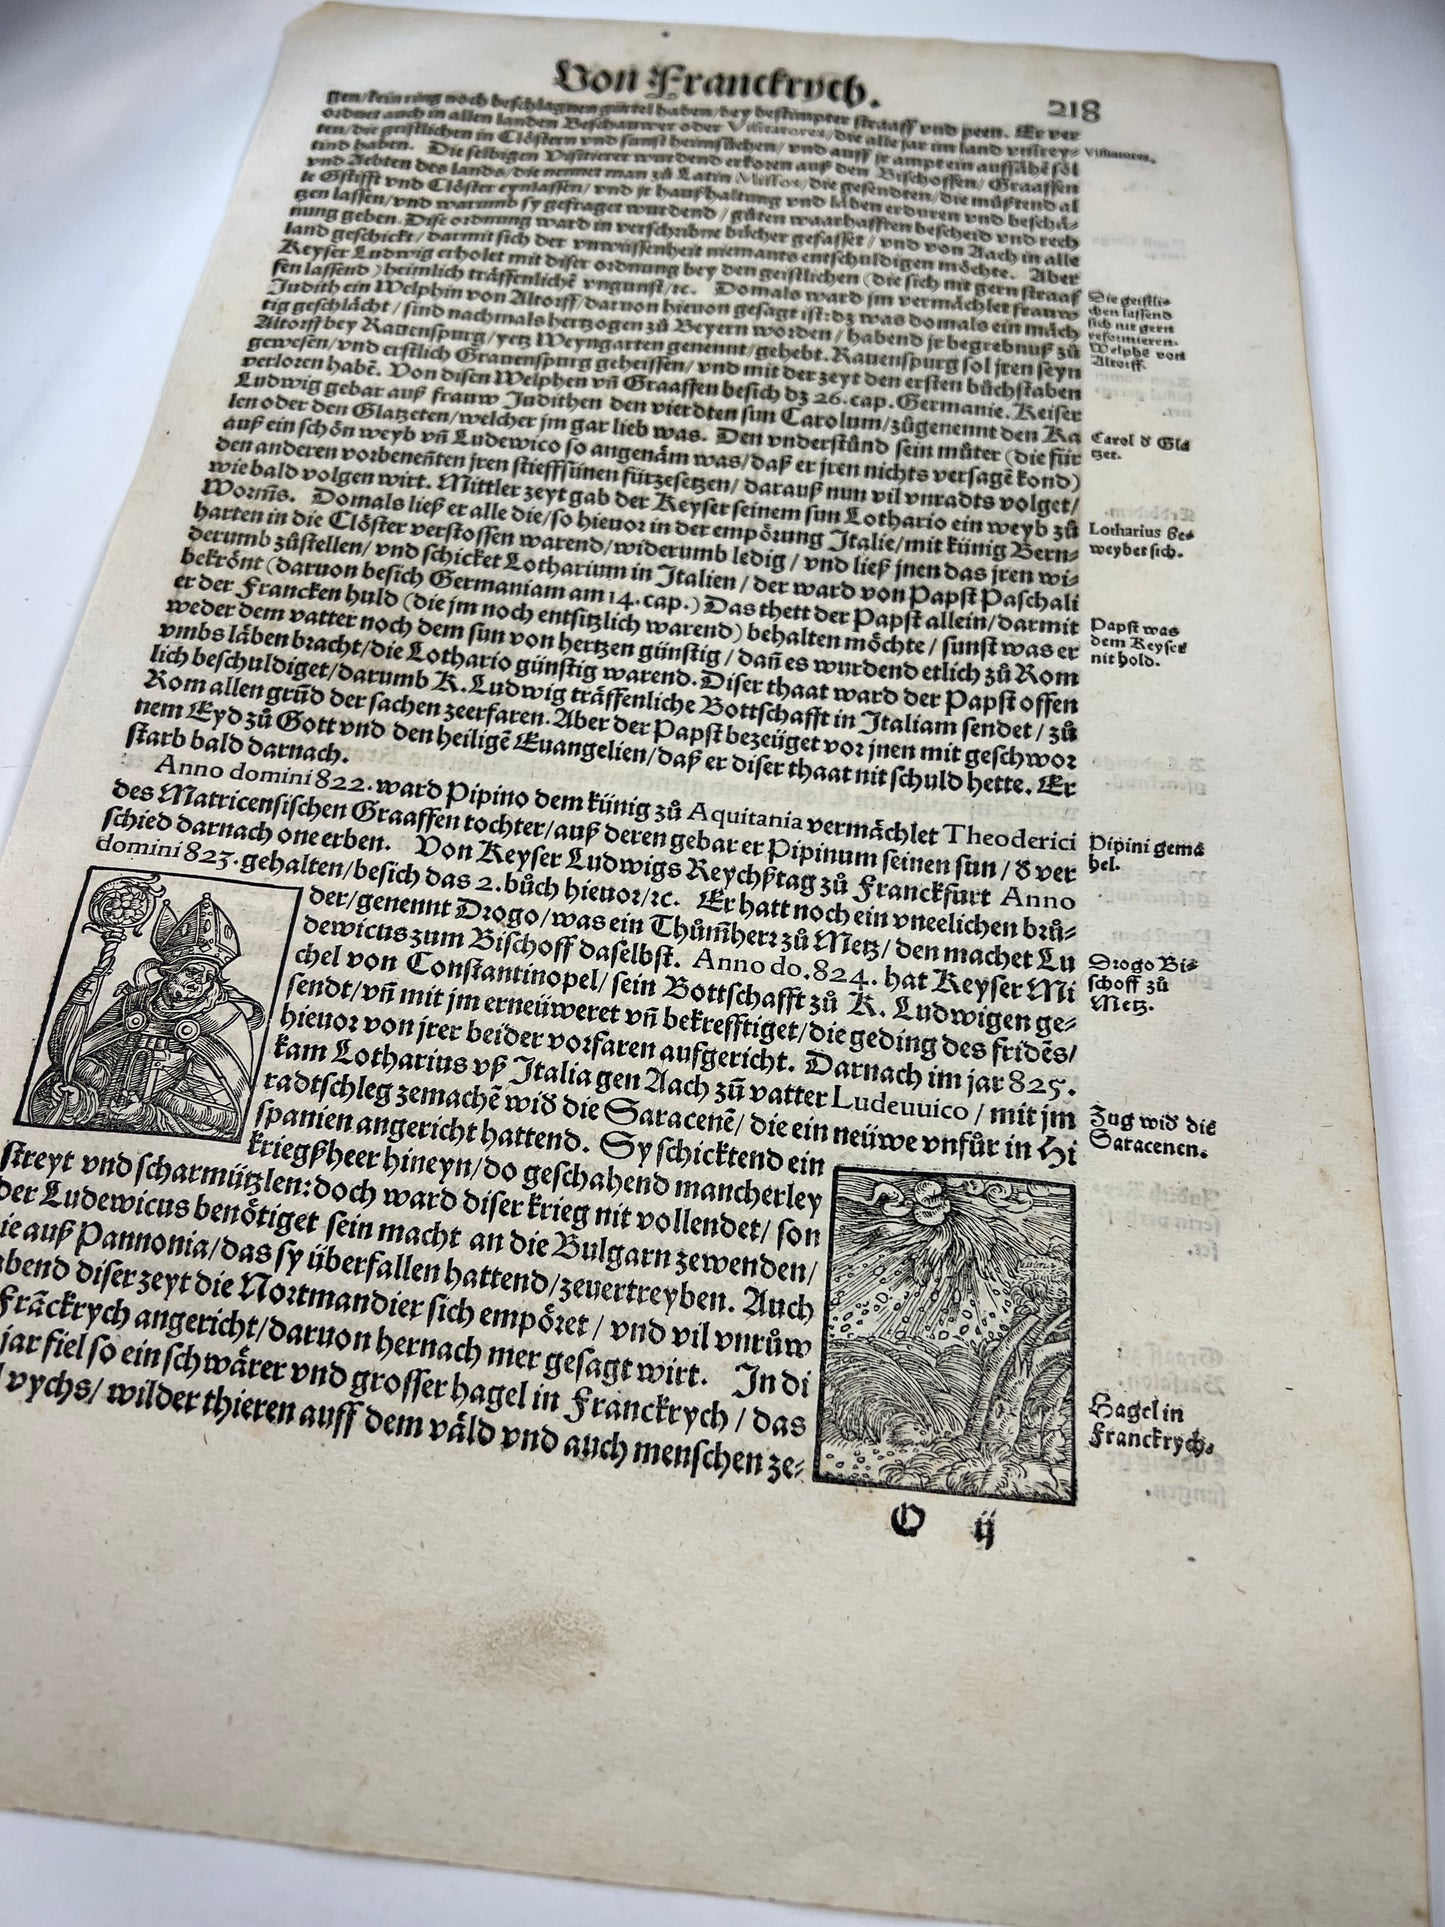 1548 Folio Leaf with 4 Woodcuts From The Stumpf Chronicle - Portents of Doom, Raining Corn & Earthquake